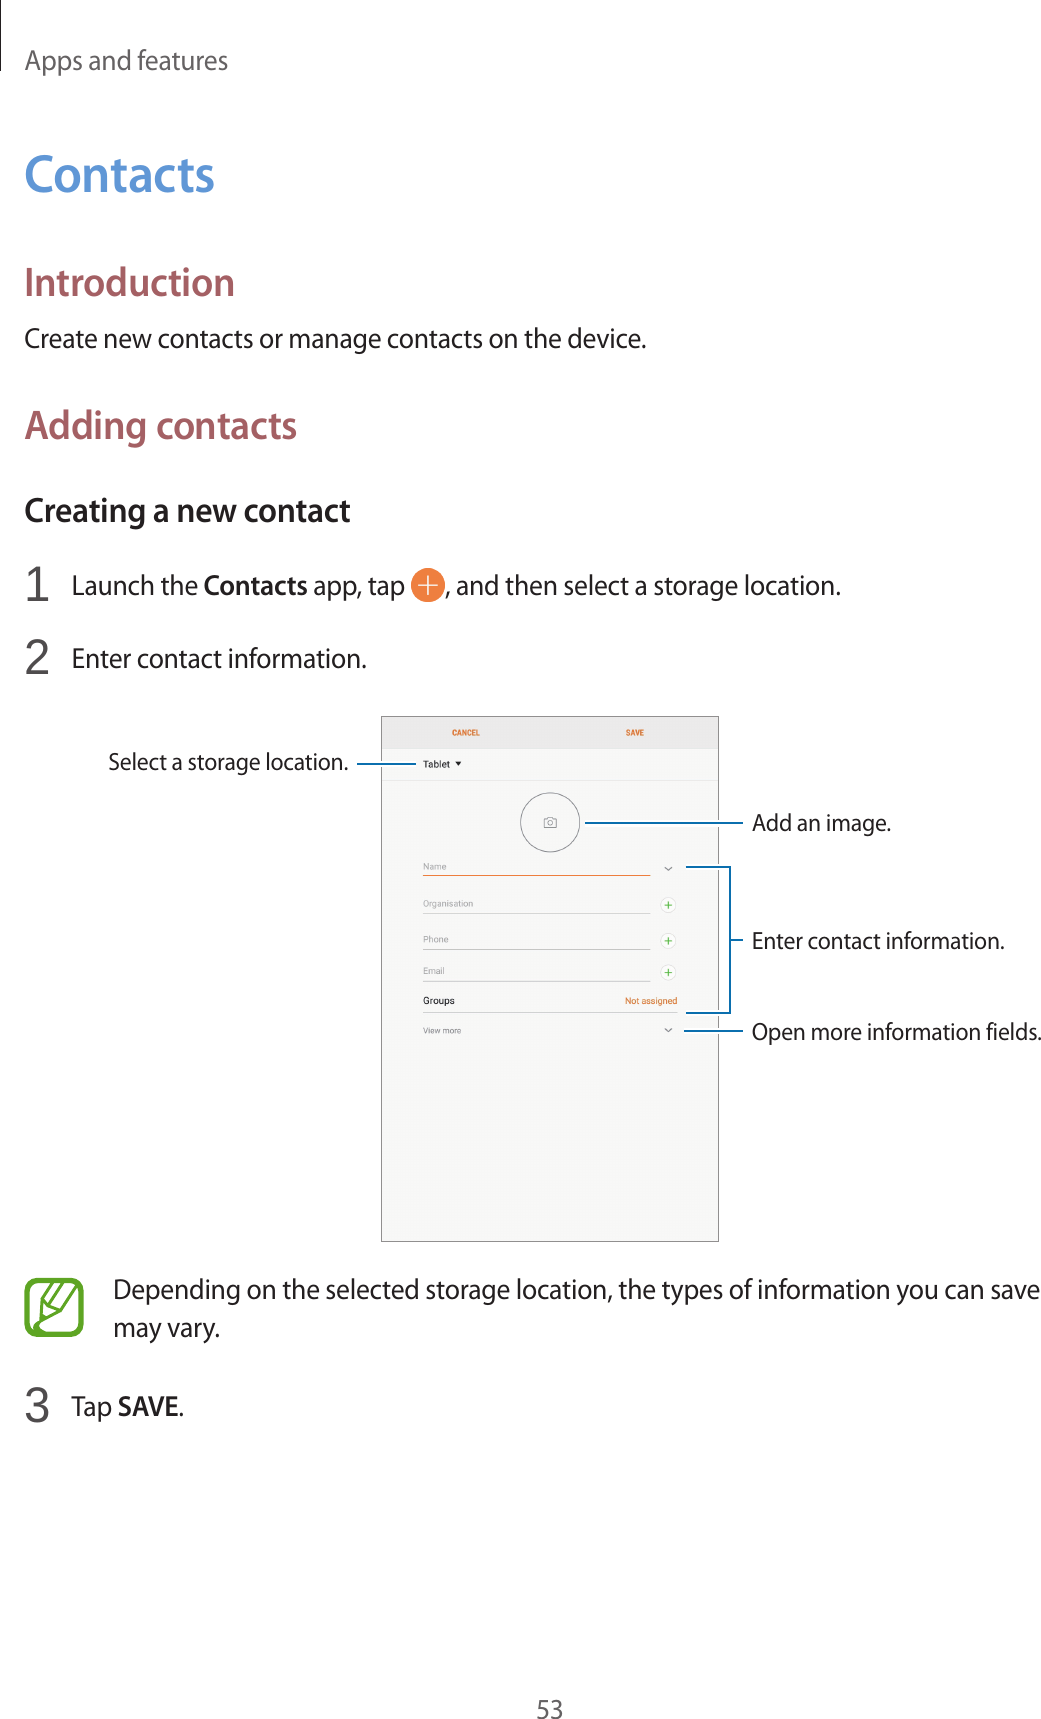 Apps and features53ContactsIntroductionCreate new contacts or manage contacts on the device.Adding contactsCreating a new contact1  Launch the Contacts app, tap  , and then select a storage location.2  Enter contact information.Select a storage location.Add an image.Open more information fields.Enter contact information.Depending on the selected storage location, the types of information you can save may vary.3  Tap SAVE.